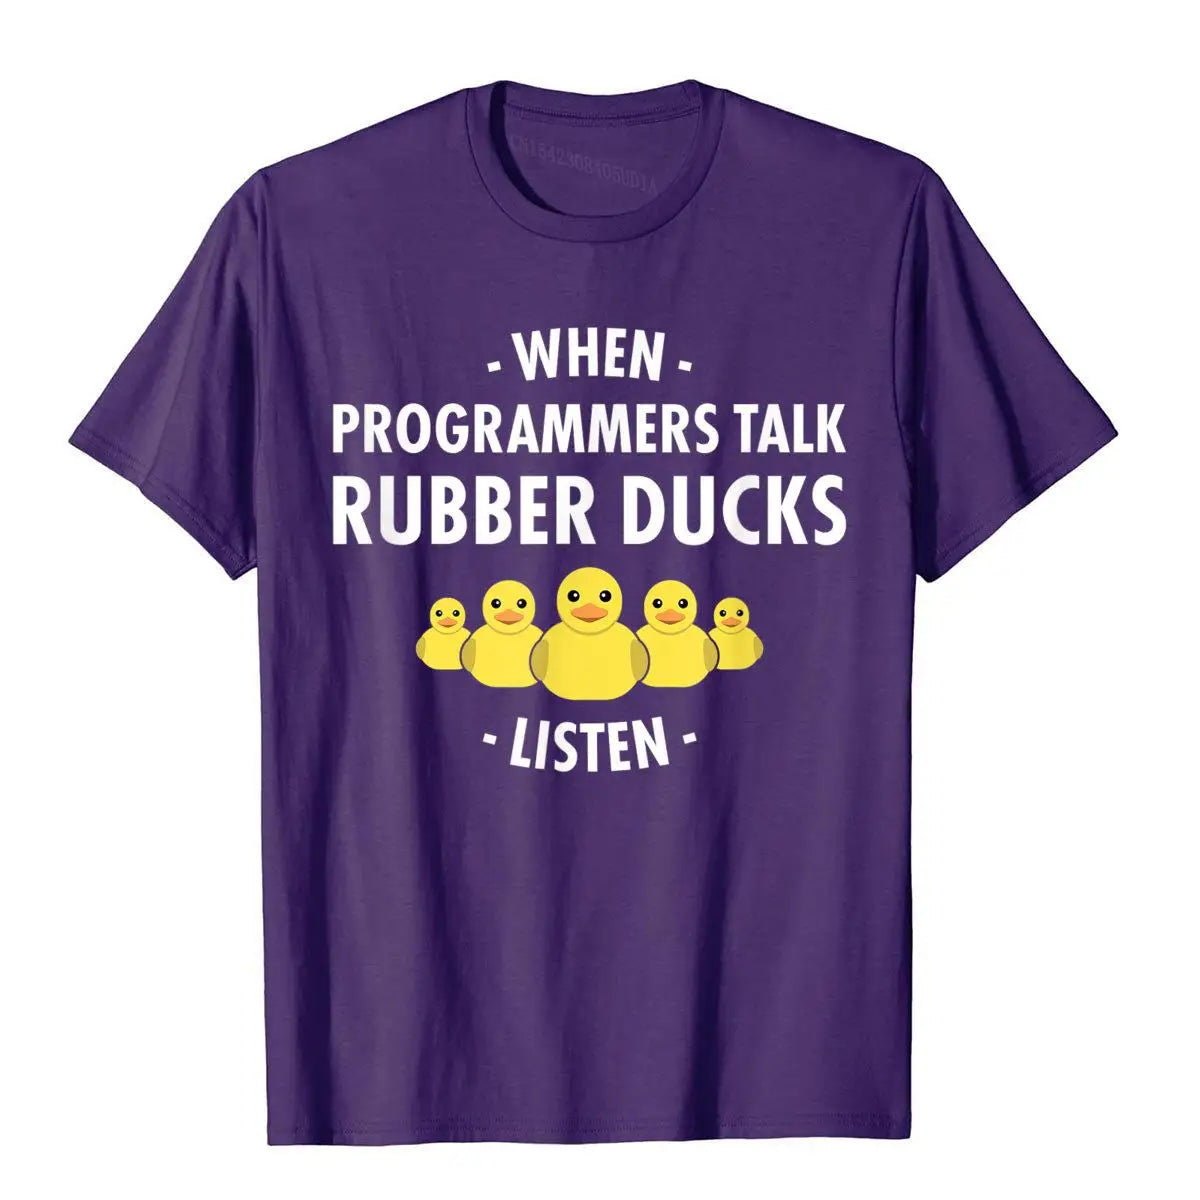 Rubber Duck Debugging When Programmers Talk Funny T-Shirt Cute Men Top T-Shirts Cotton Tops & Tees Camisas Hombre